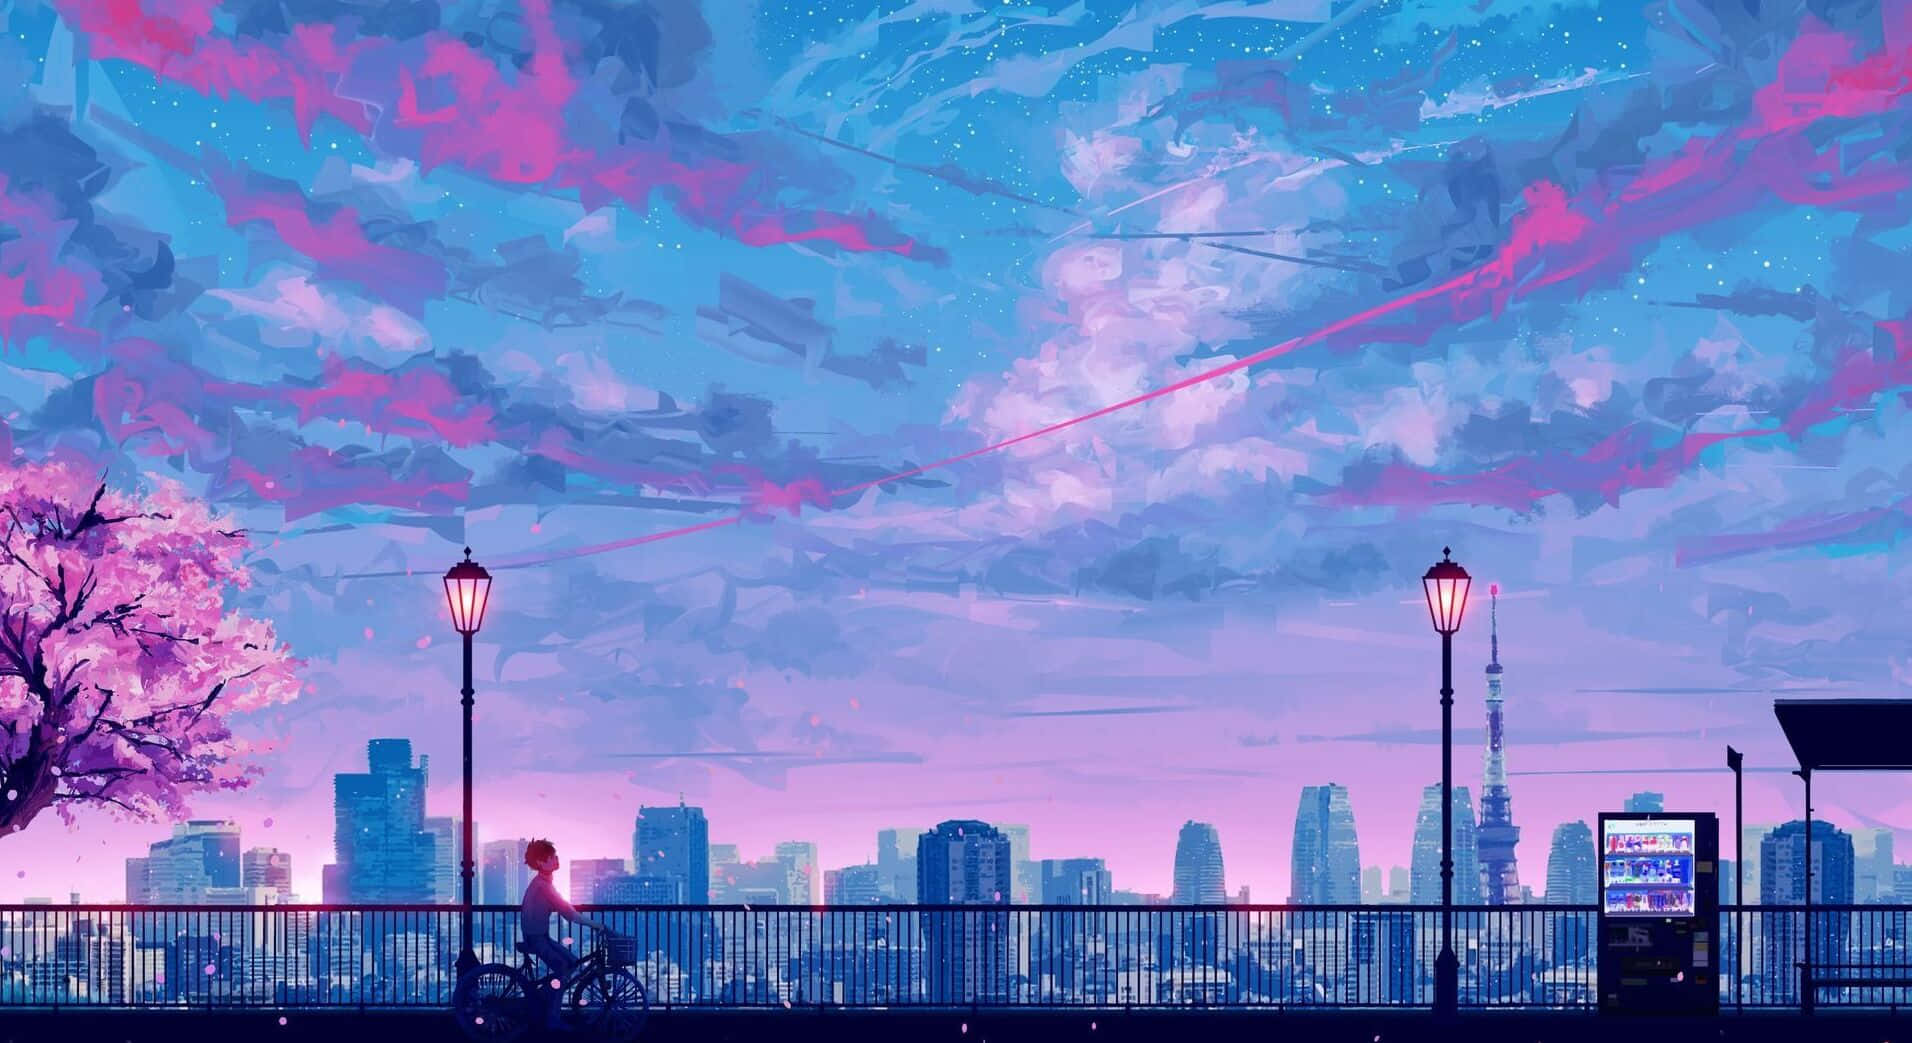 A Painting Of A City With A Skyline And Pink Clouds